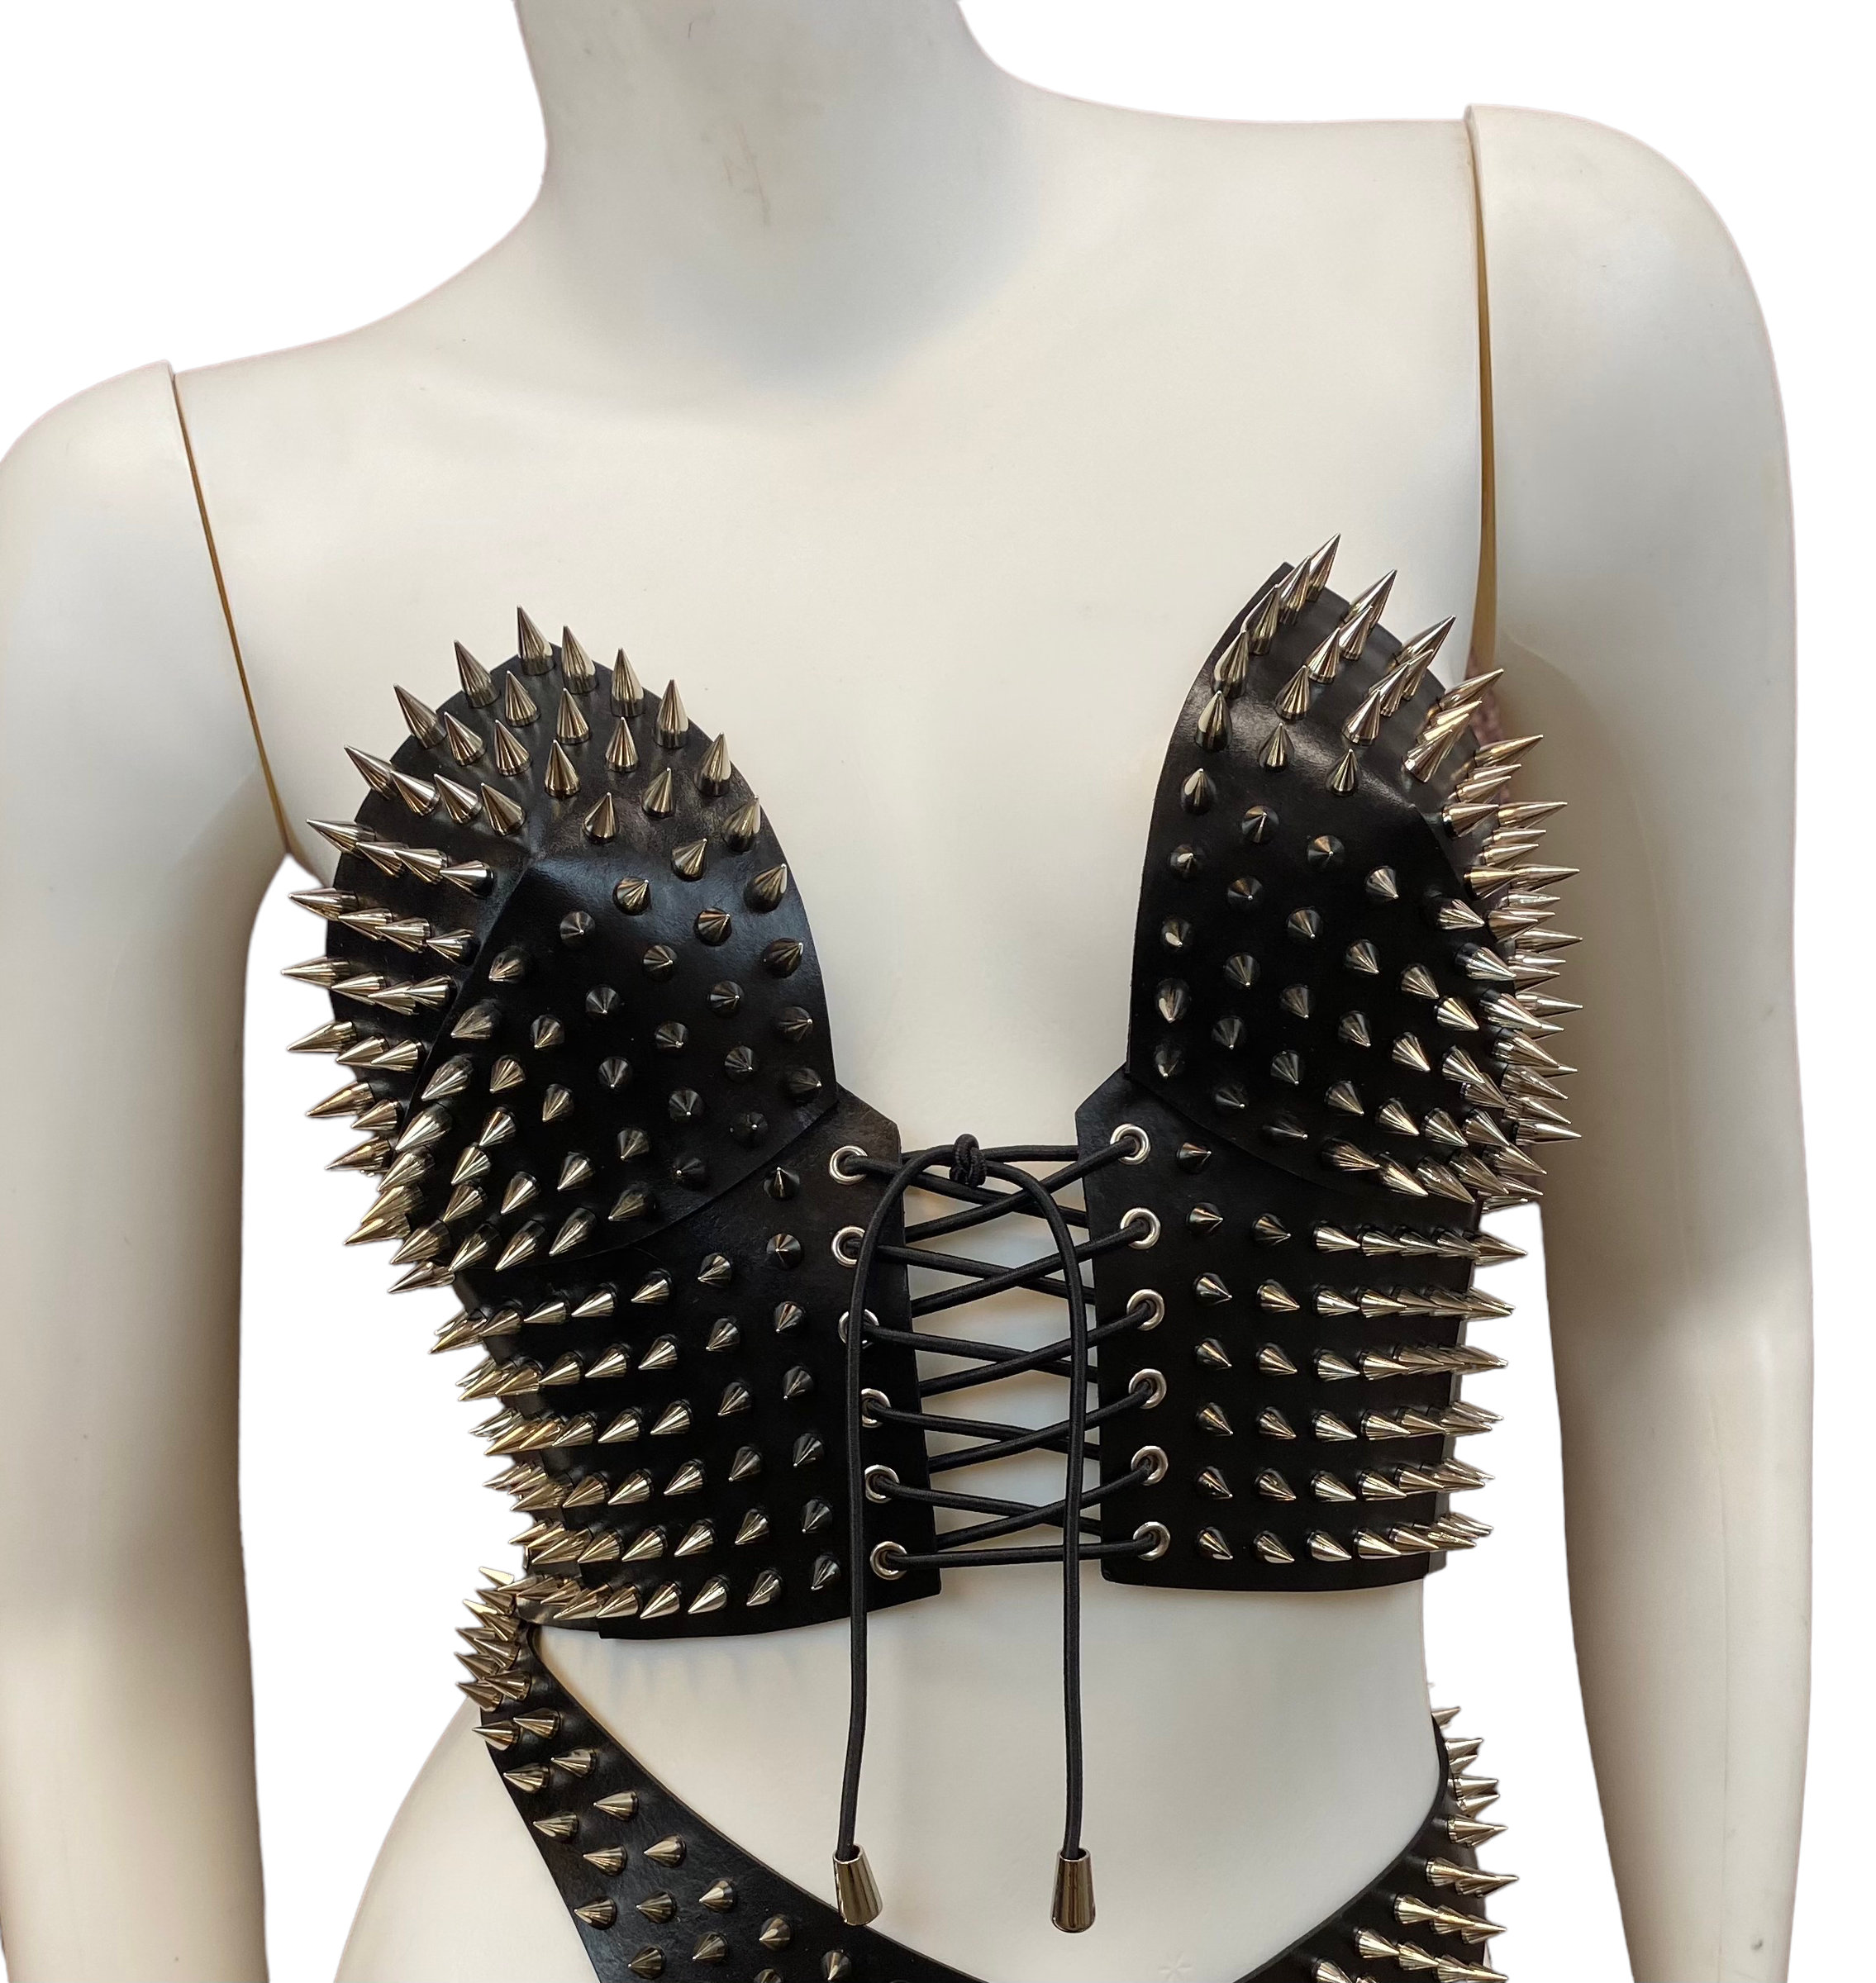 The Lunatic Spiked Bra, Leather Bra With Spikes, Lace-up Bralette, Custom  Bra Harness, Handmade Leather Lingerie, Spiked Bra Harness 